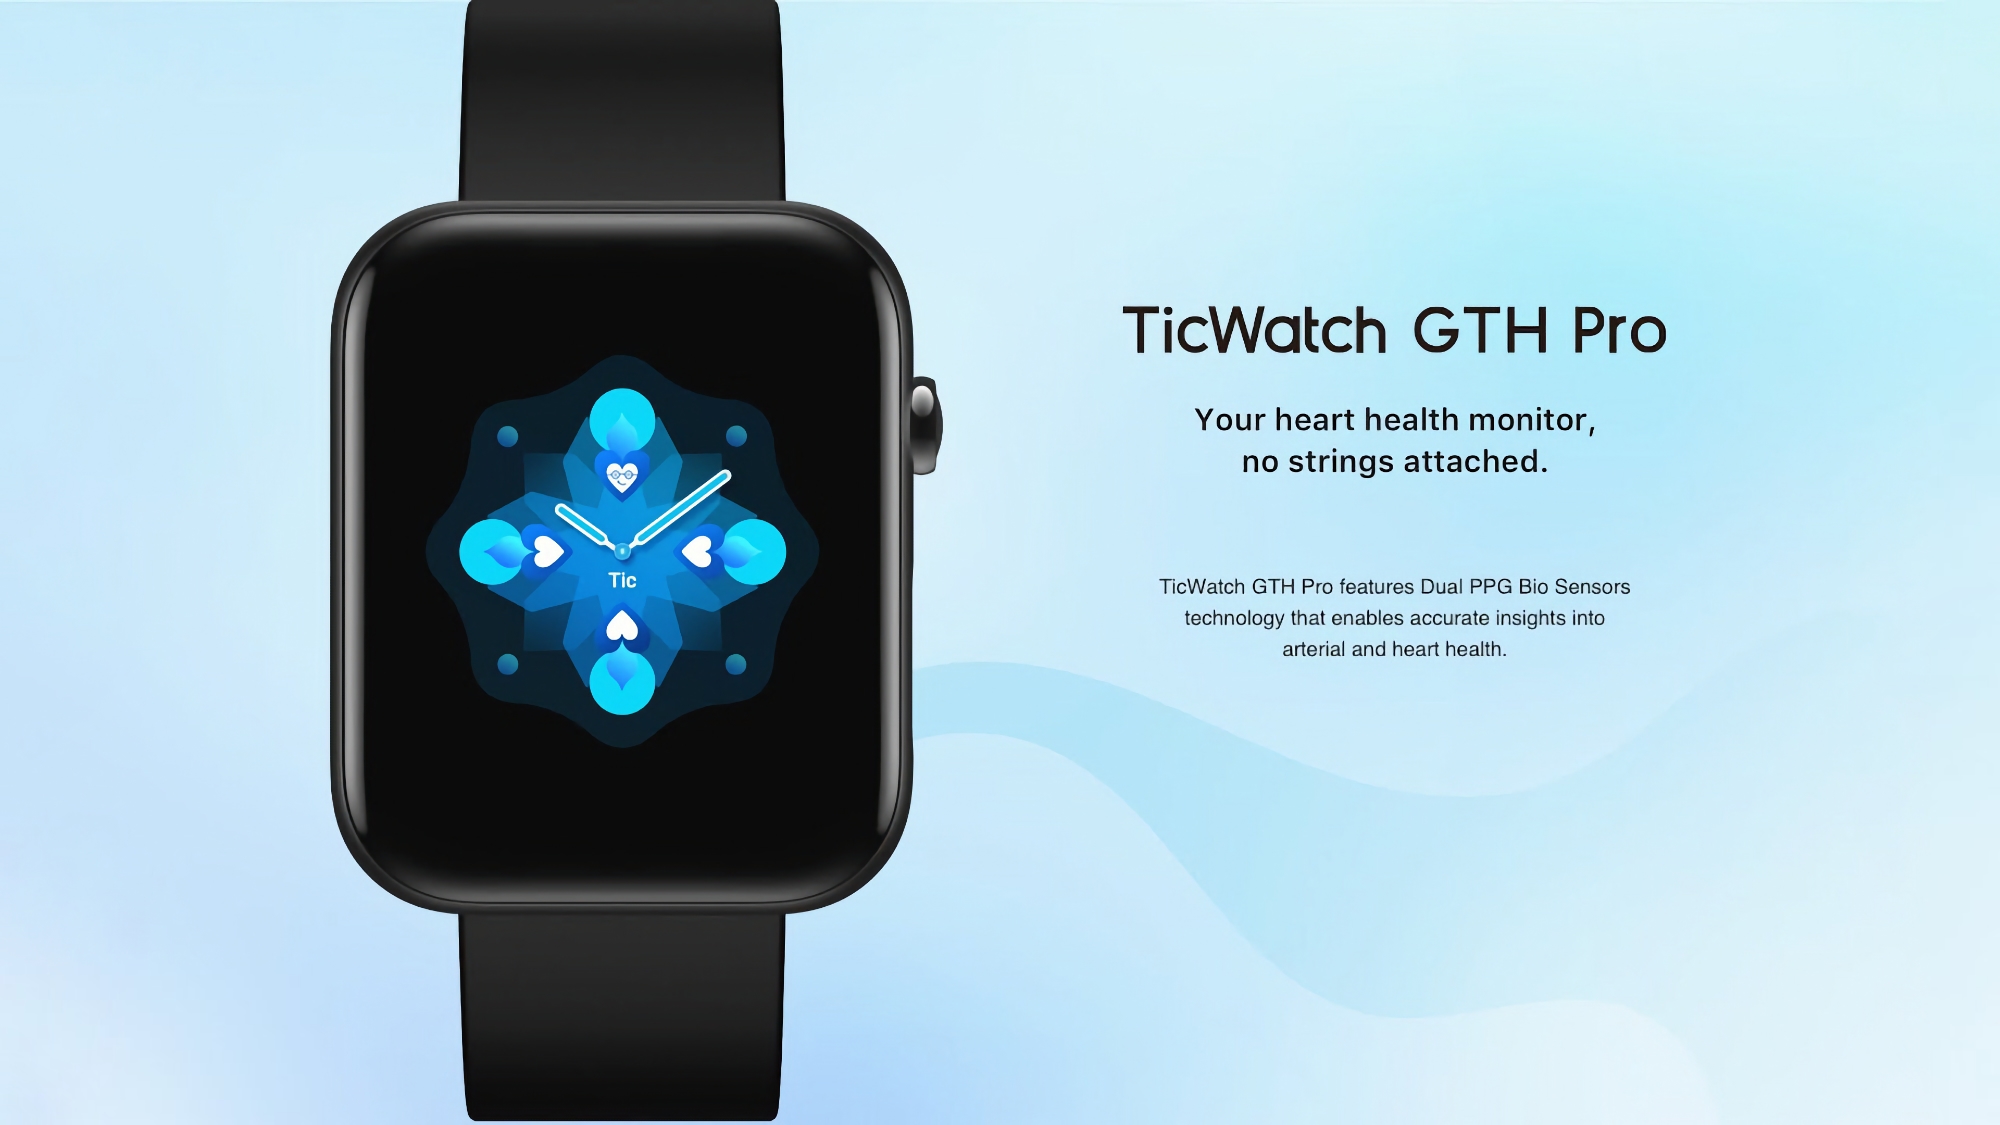 TicWatch GTH Pro on Amazon: smartwatch with vascular sensor, water protection and 10-day battery life for $50.99 ($49 off)